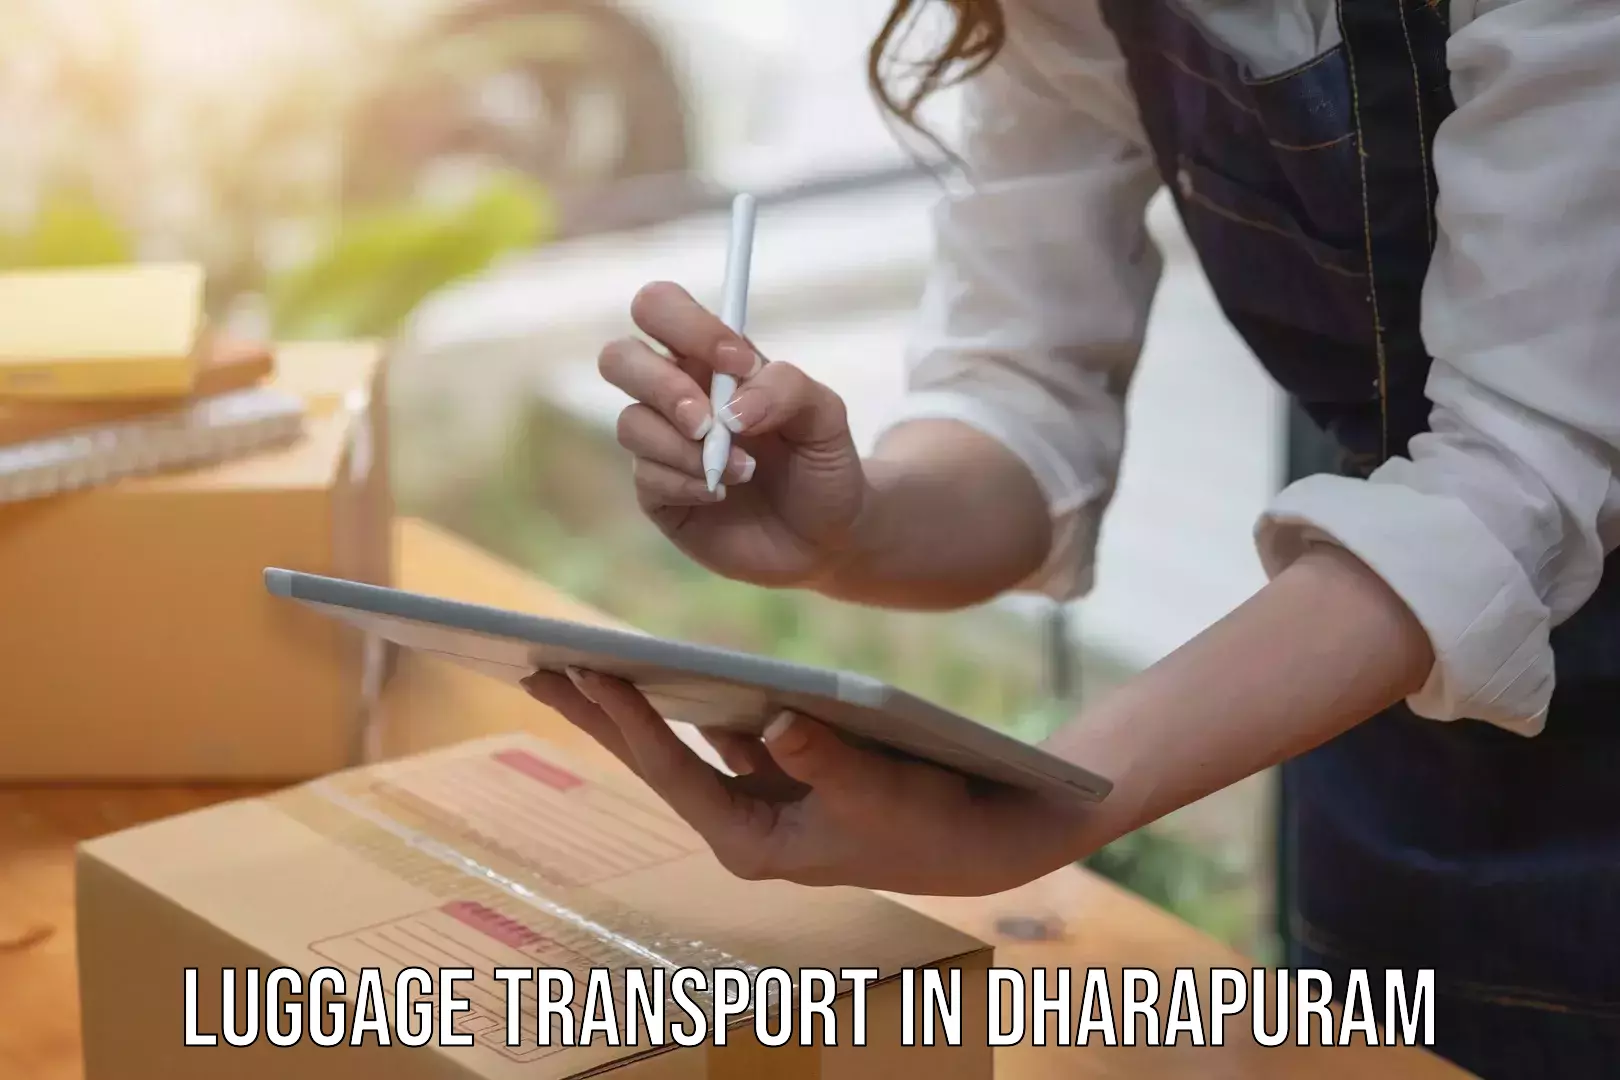 Luggage delivery operations in Dharapuram